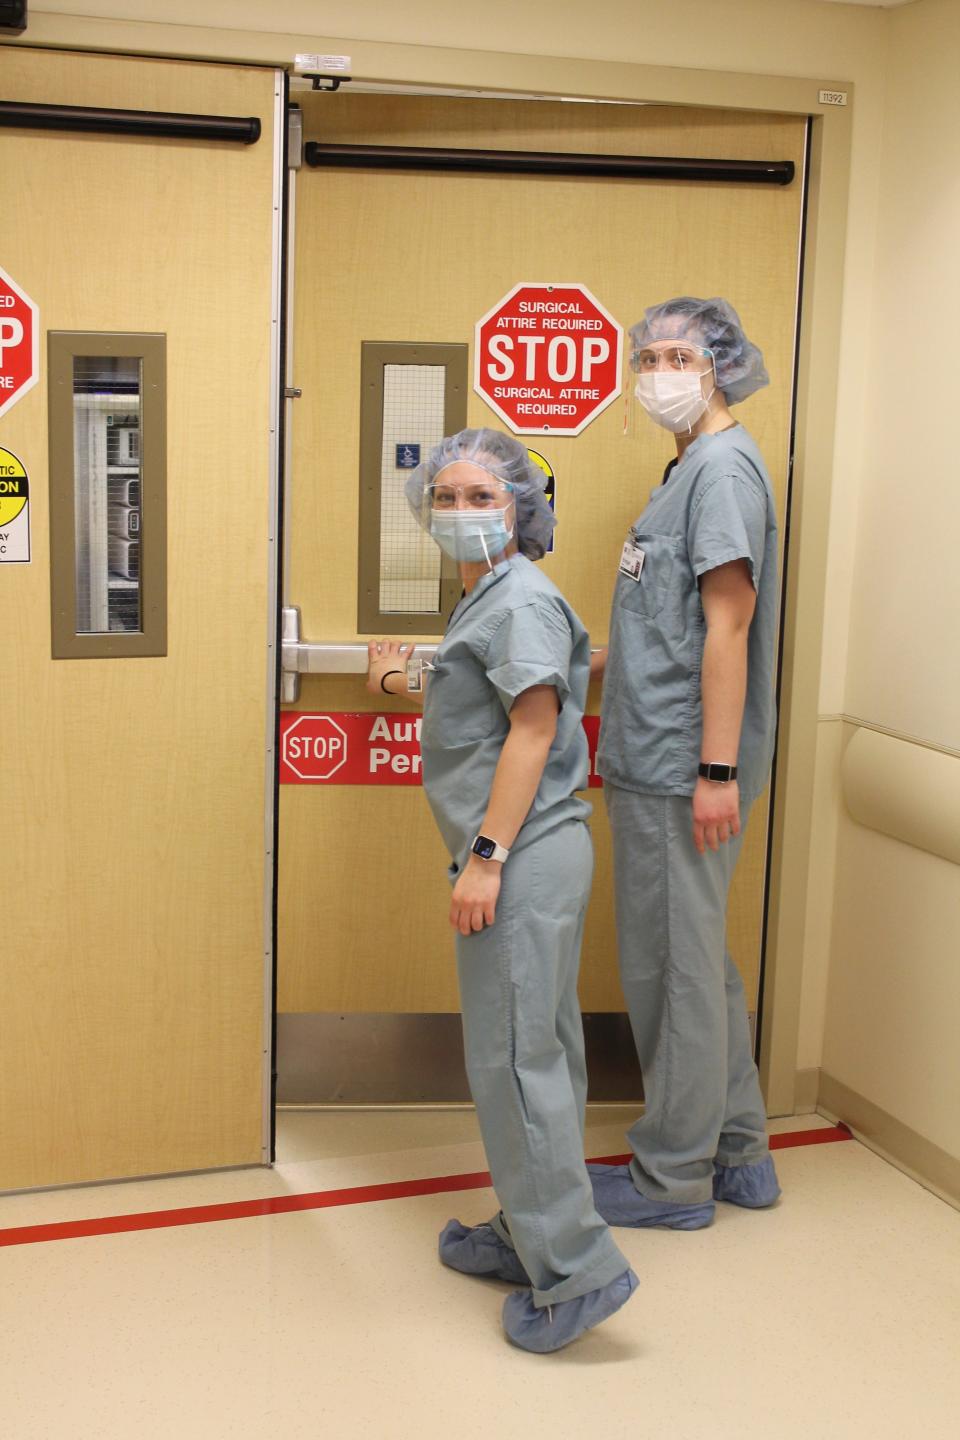 Alex Finocchario, left, and Bridget Miller enter the operating room at Thompson Hospital to observe a gynecological surgery performed by Dr. Jillian Babu. The two are among the high school seniors on Thompson’s campus through Wayne-Finger Lakes BOCES’ New Vision Programs.